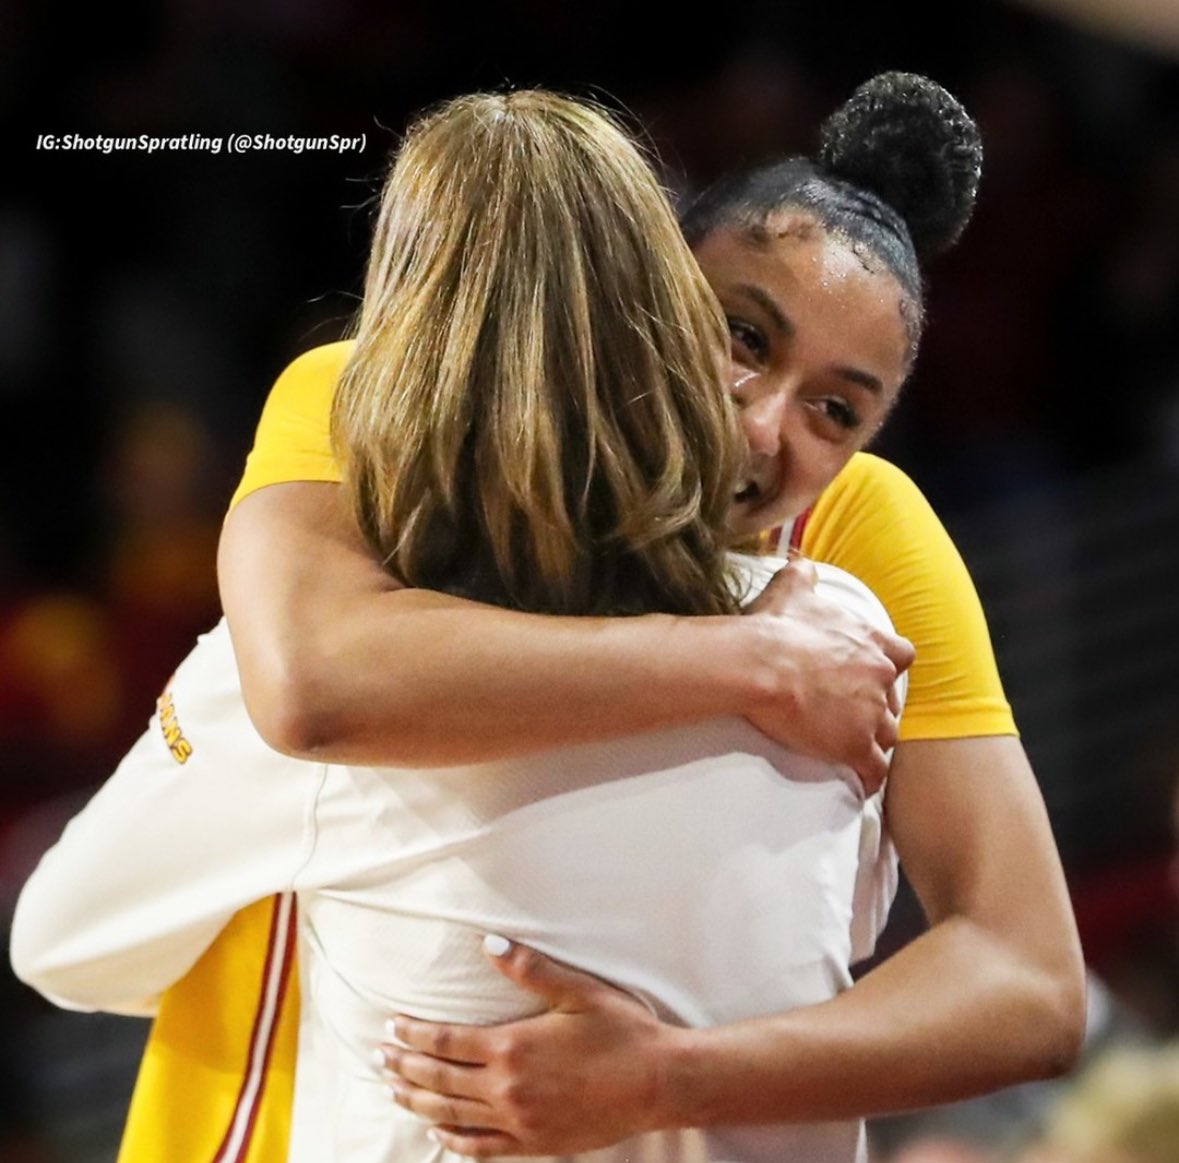 If a picture can paint what a player coach relationship is all about this is it. I believe @CoachLindsayG is a testament to what building relationships and character with these young women is all about. In Geezy we trust. ❤️💛✌️ #fighton #uscwbb